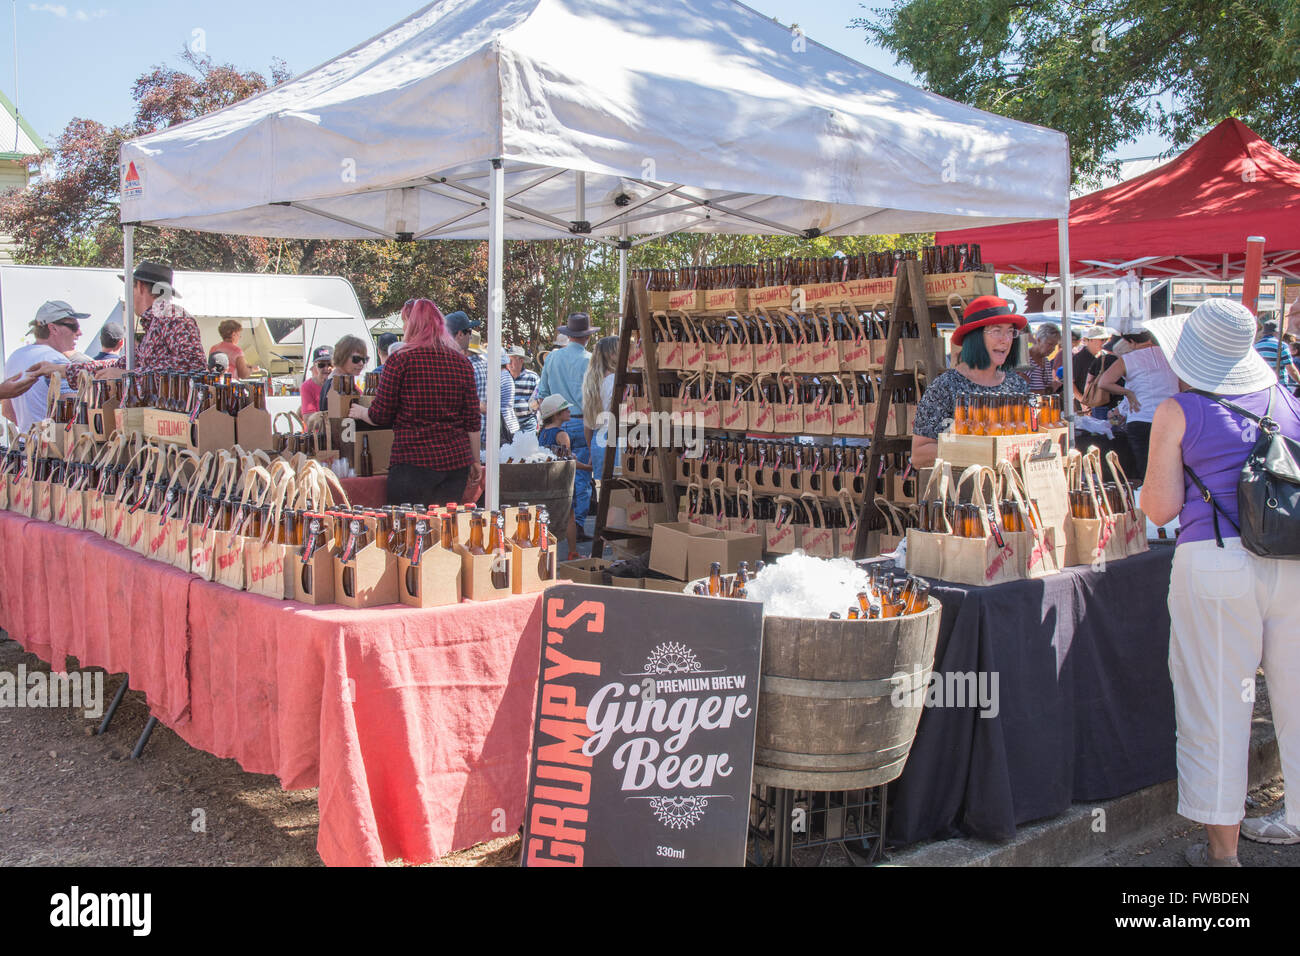 Ginger Beer Stall at outdoor market, Nundle Australia Stock Photo